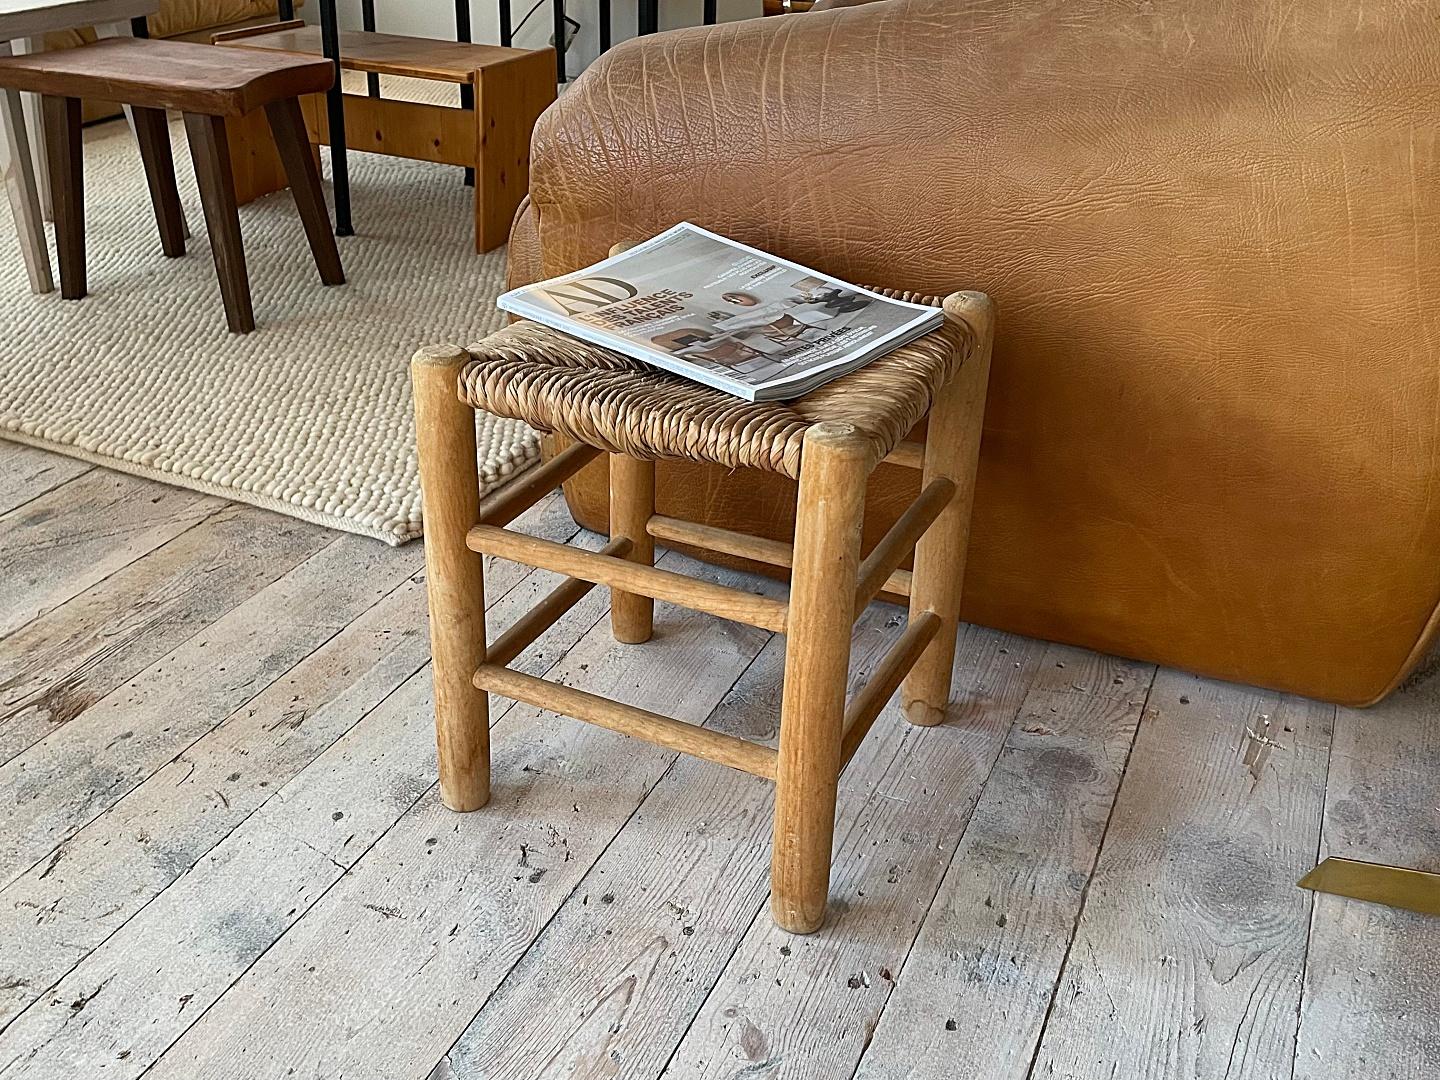 Varnished solid ash and straw “Bauche” stool by Charlotte Perriand for Sentou 1960s - Model designed in 1933.

Original condition with nice patina.

Literature: 
Charlotte Perriand Un Art d'Habiter - Art of Living 1903-1959 by Jacques Barsac, Paris,